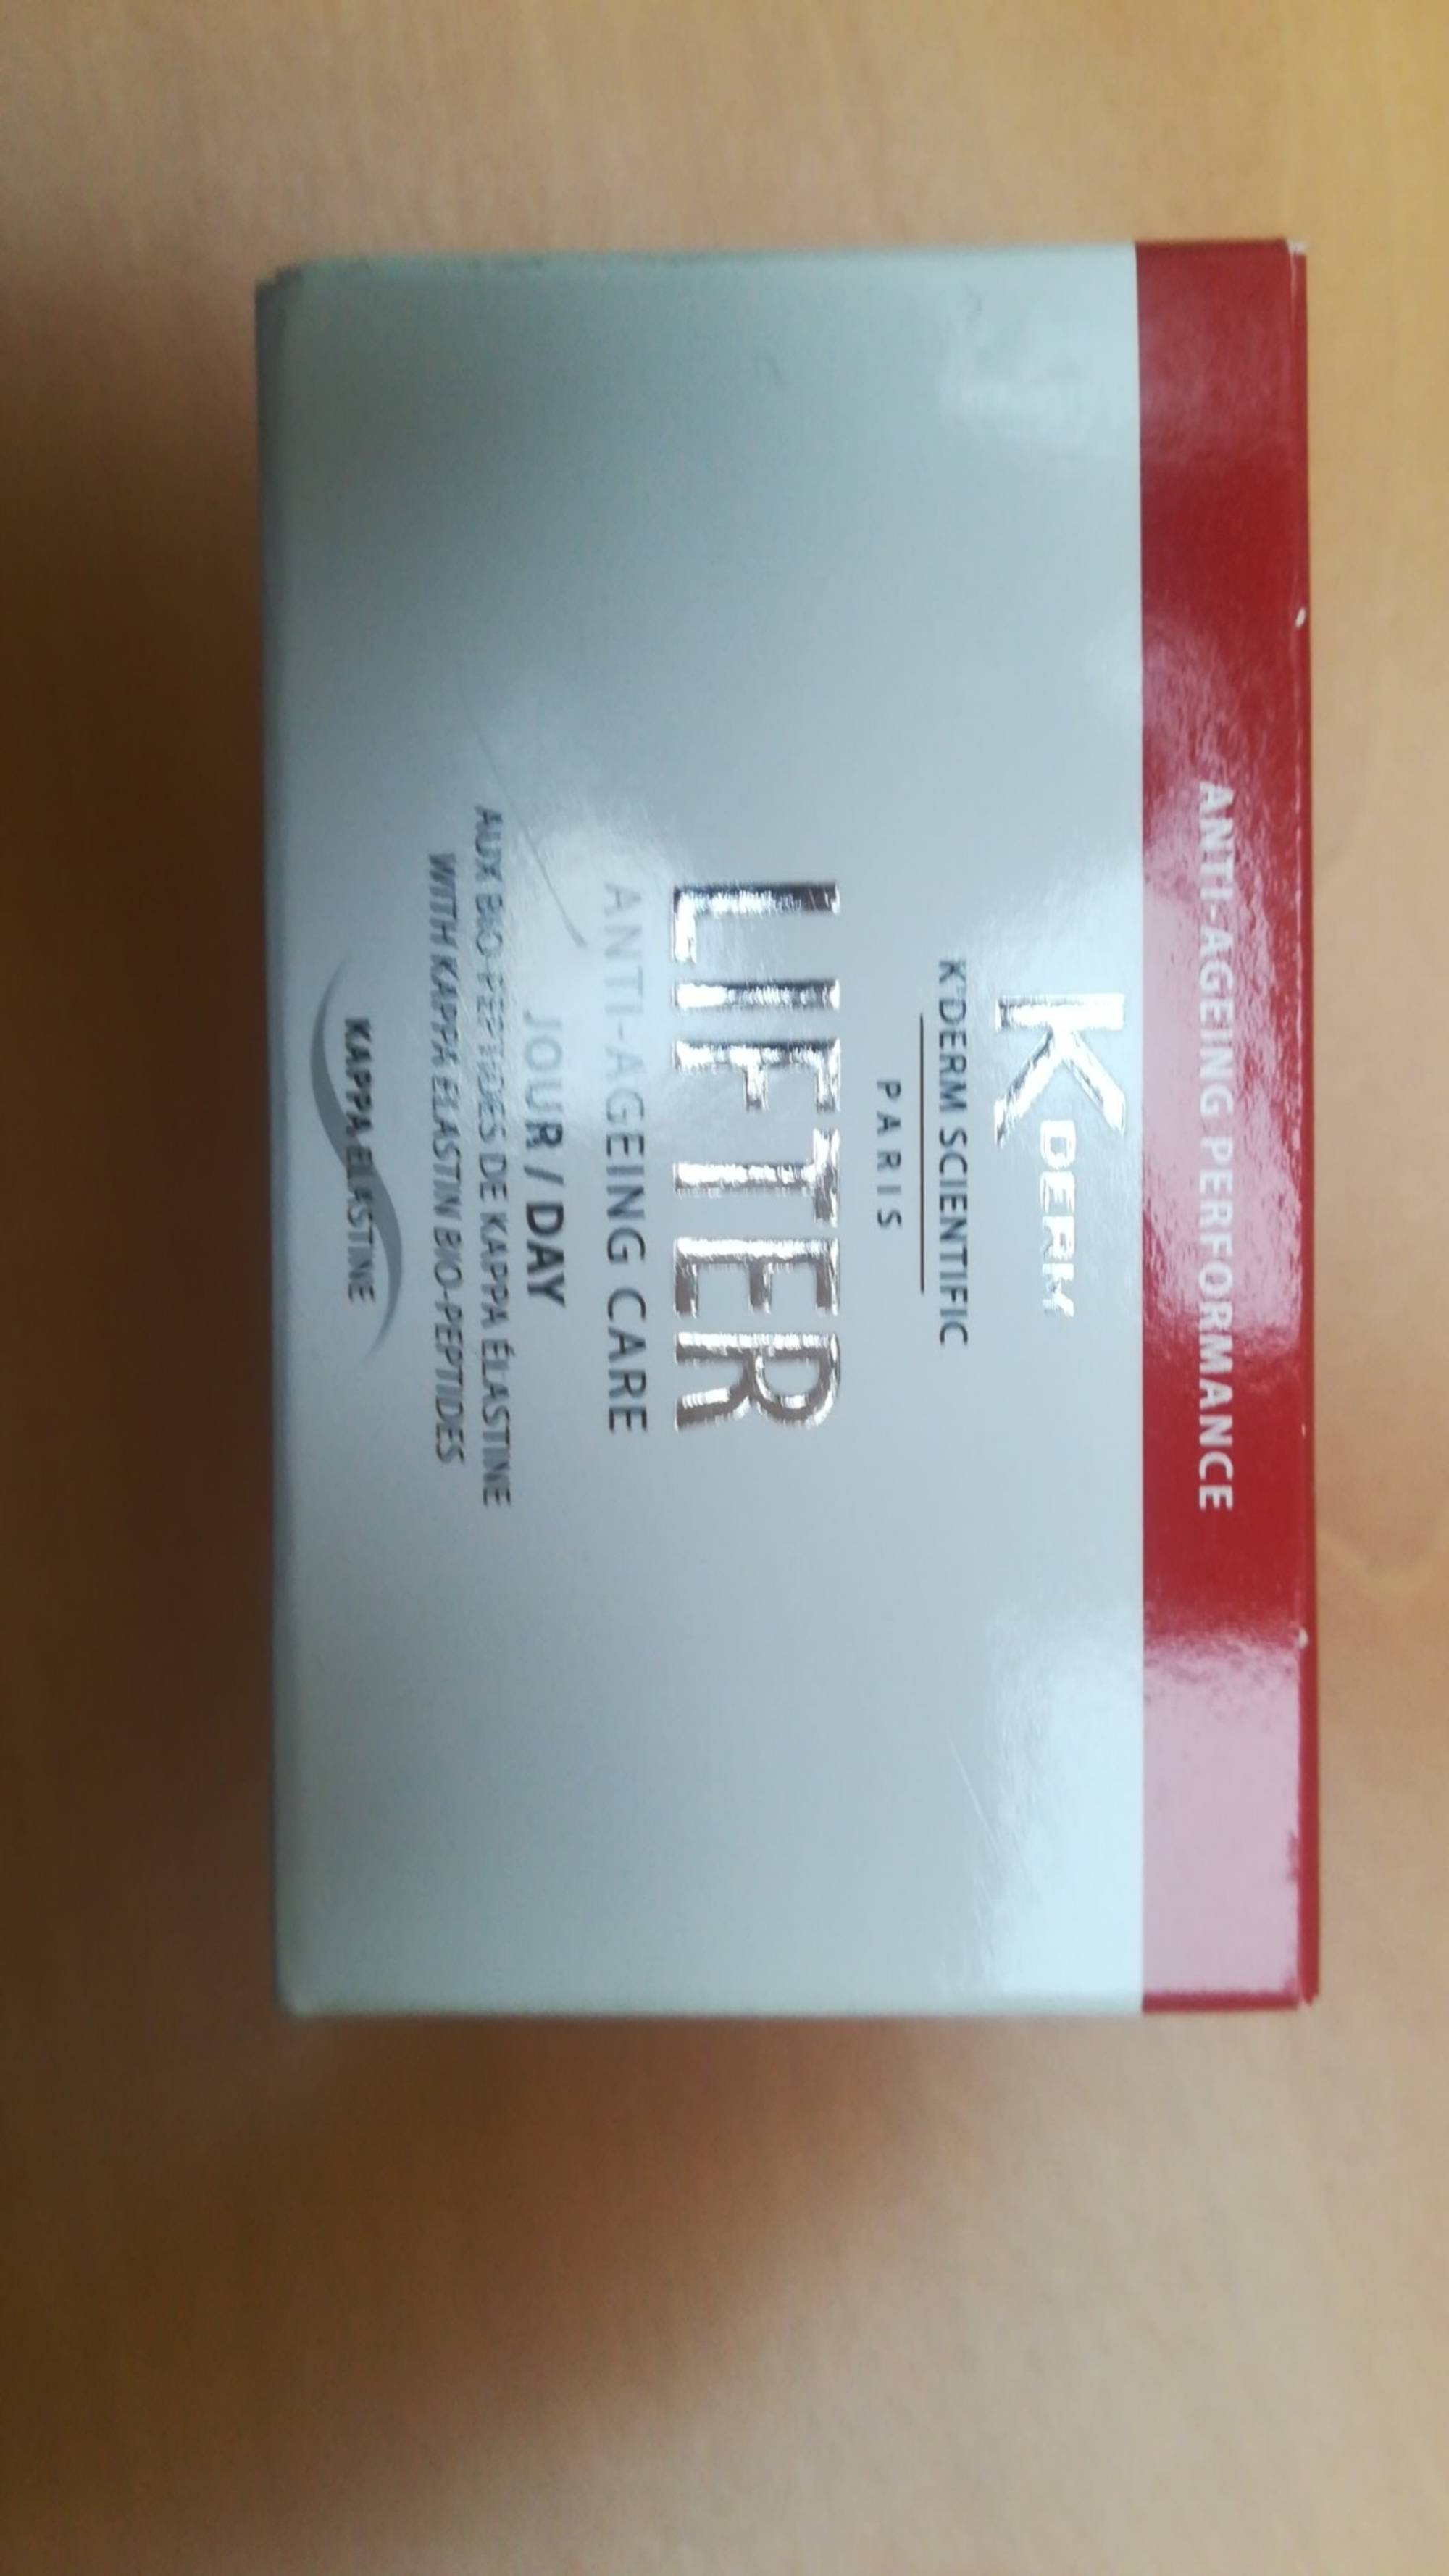 K DERM - Lifter anti-ageing care jour/day